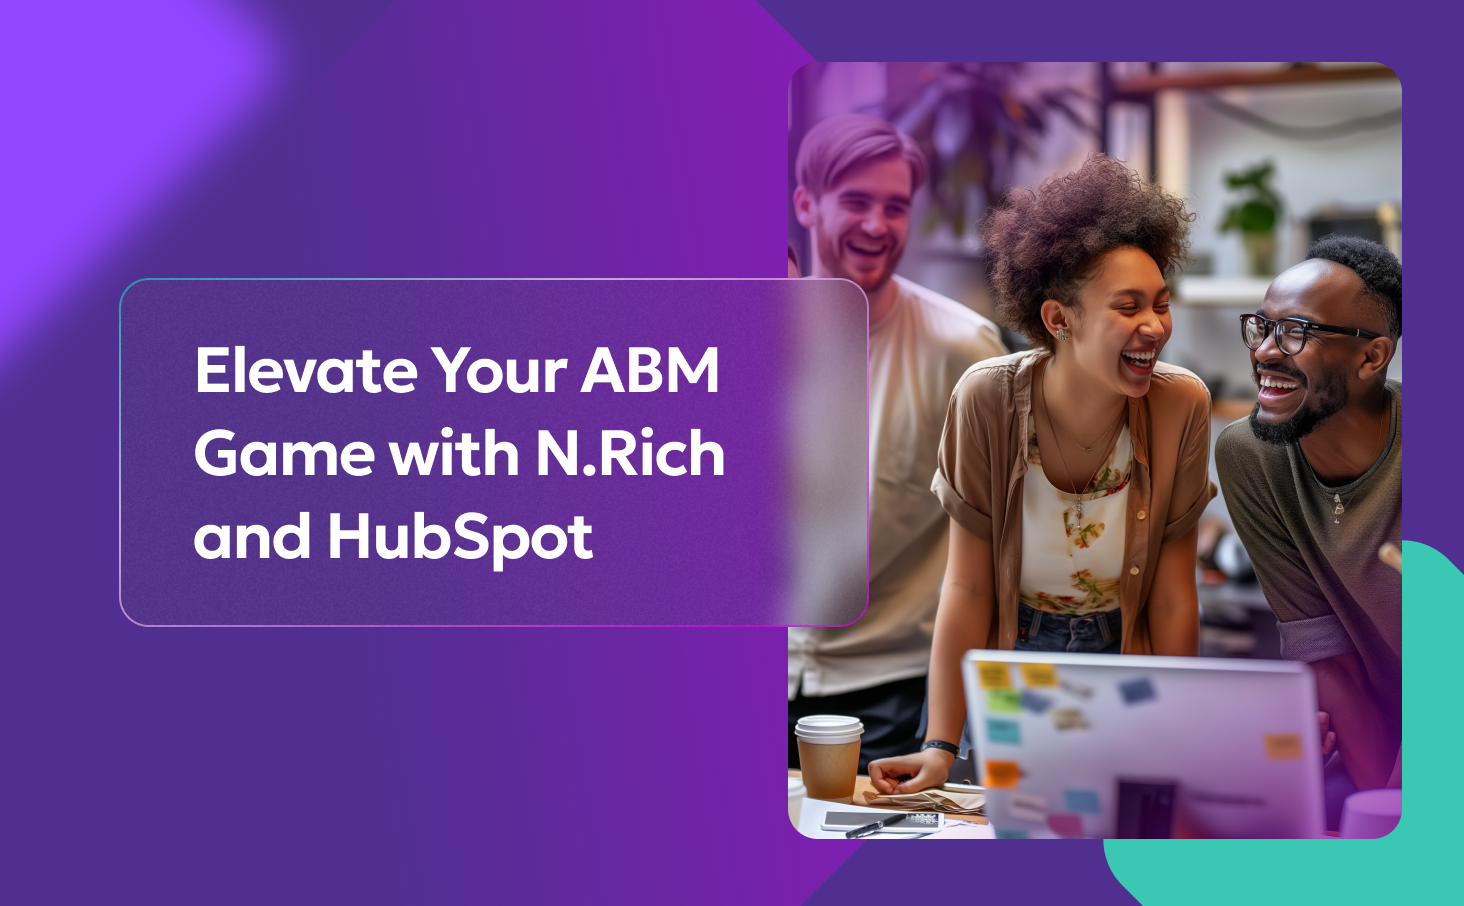 Elevate Your ABM Game with N.Rich and HubSpot